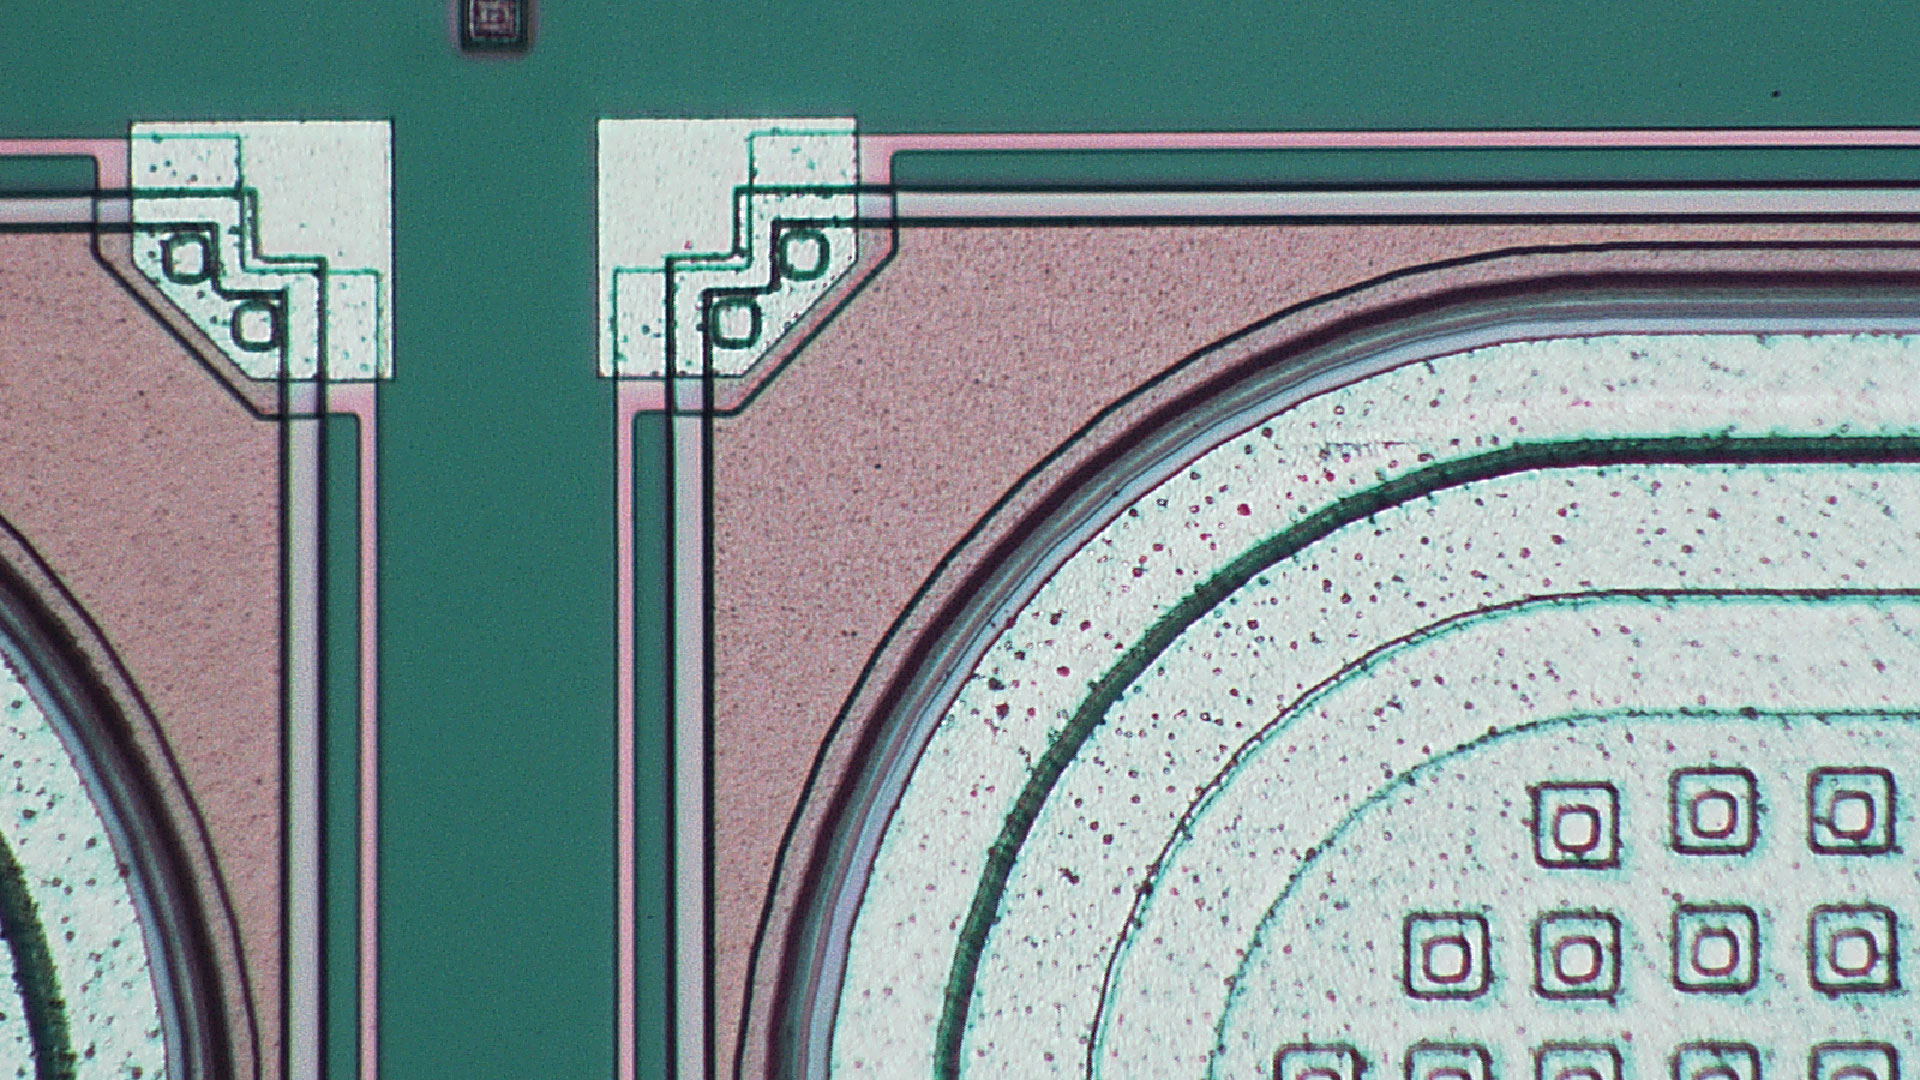 [Translate to italian:] To better see fine details and defects, a semiconductor material can be inspected using a microscope with various types of lighting. This image was taken with coaxial illumination. 